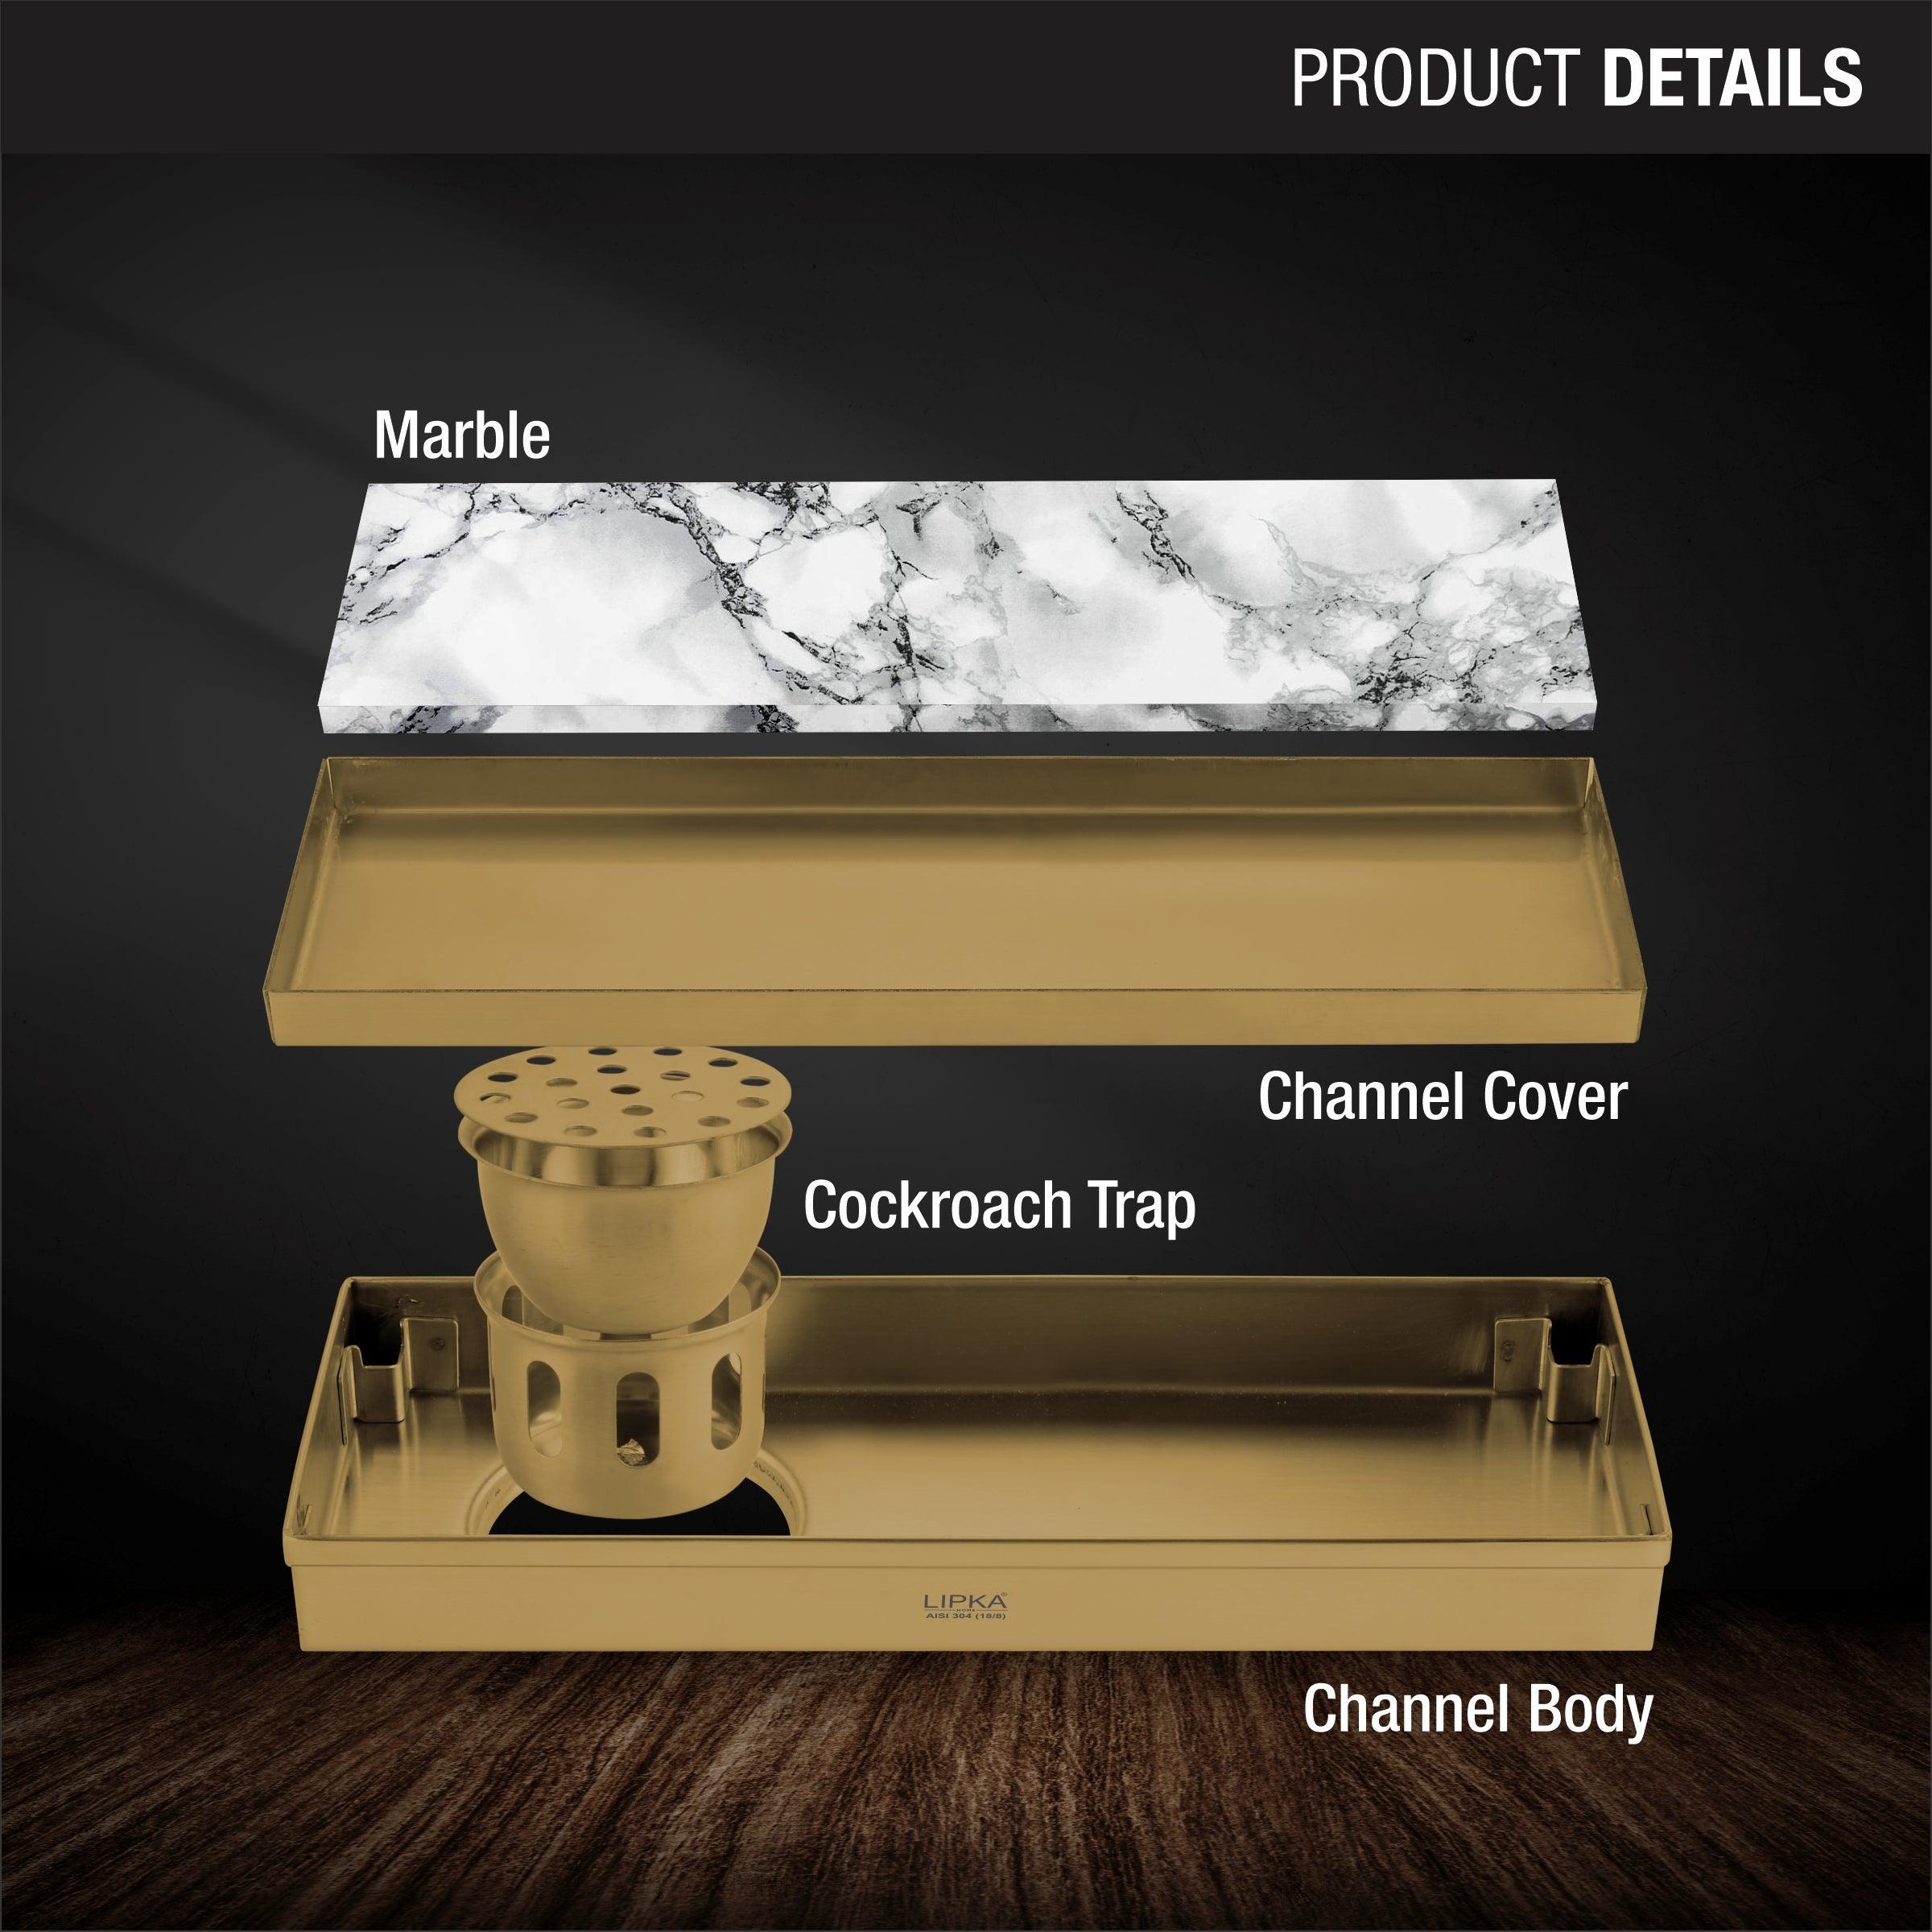 Marble Insert Shower Drain Channel - Yellow Gold (12 x 5 Inches) product details